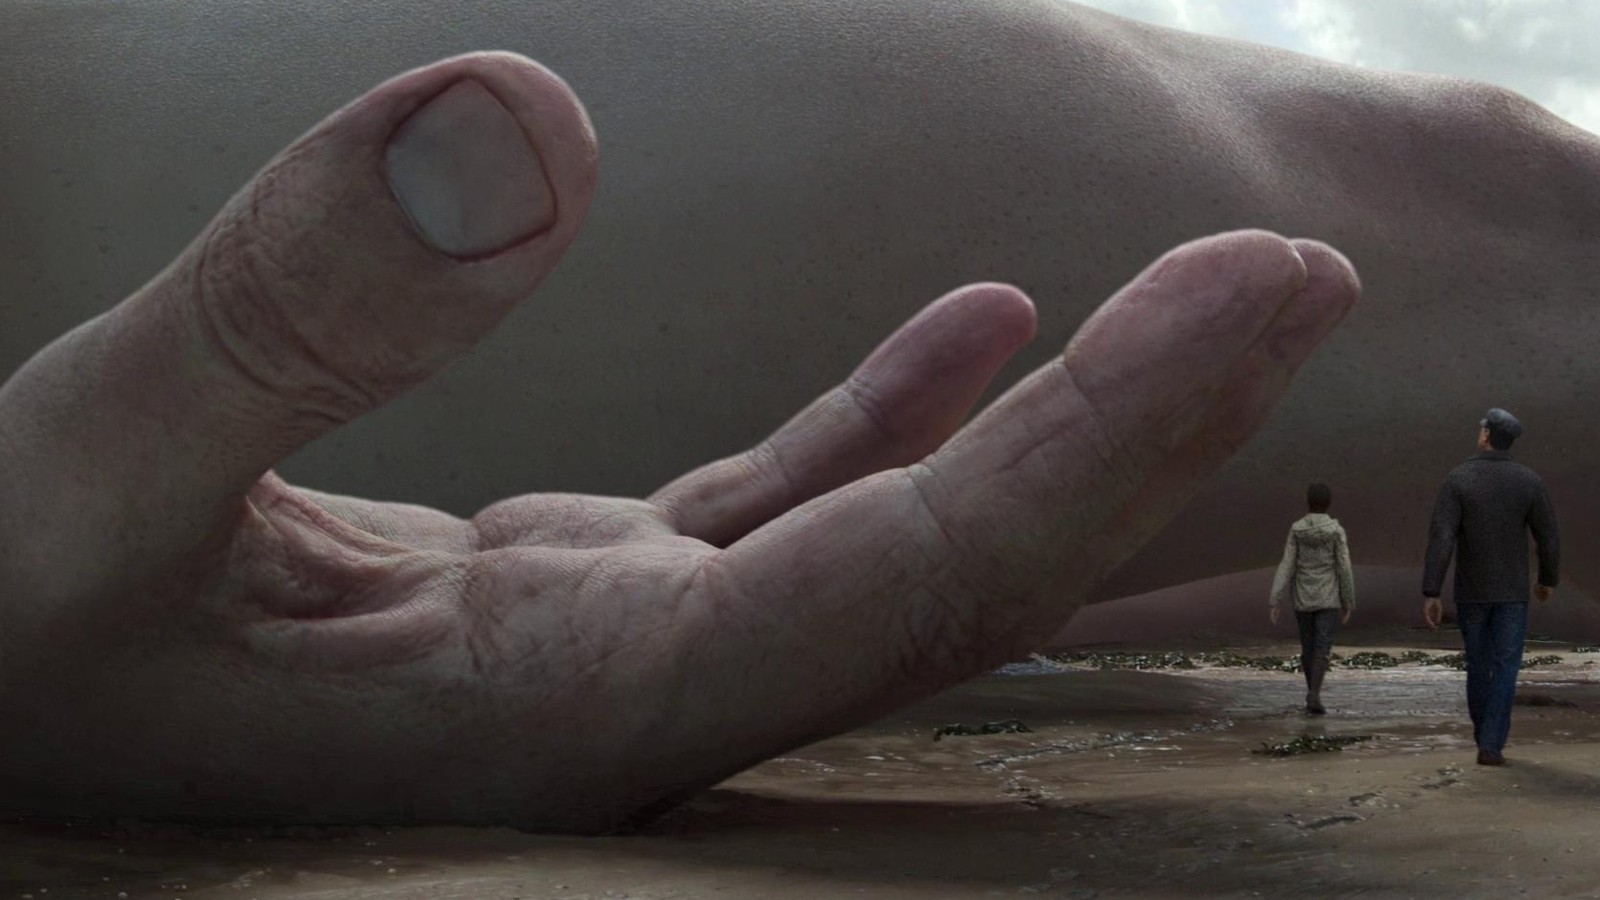 Screenshot from the animated tv series Love, Death & Robots. This still is from the episode The Drowned Giant. Here we see a close up of a giant hand. There are a man and woman standing nexty to the hand, but they're barely the height of the giant hand's fingernail.